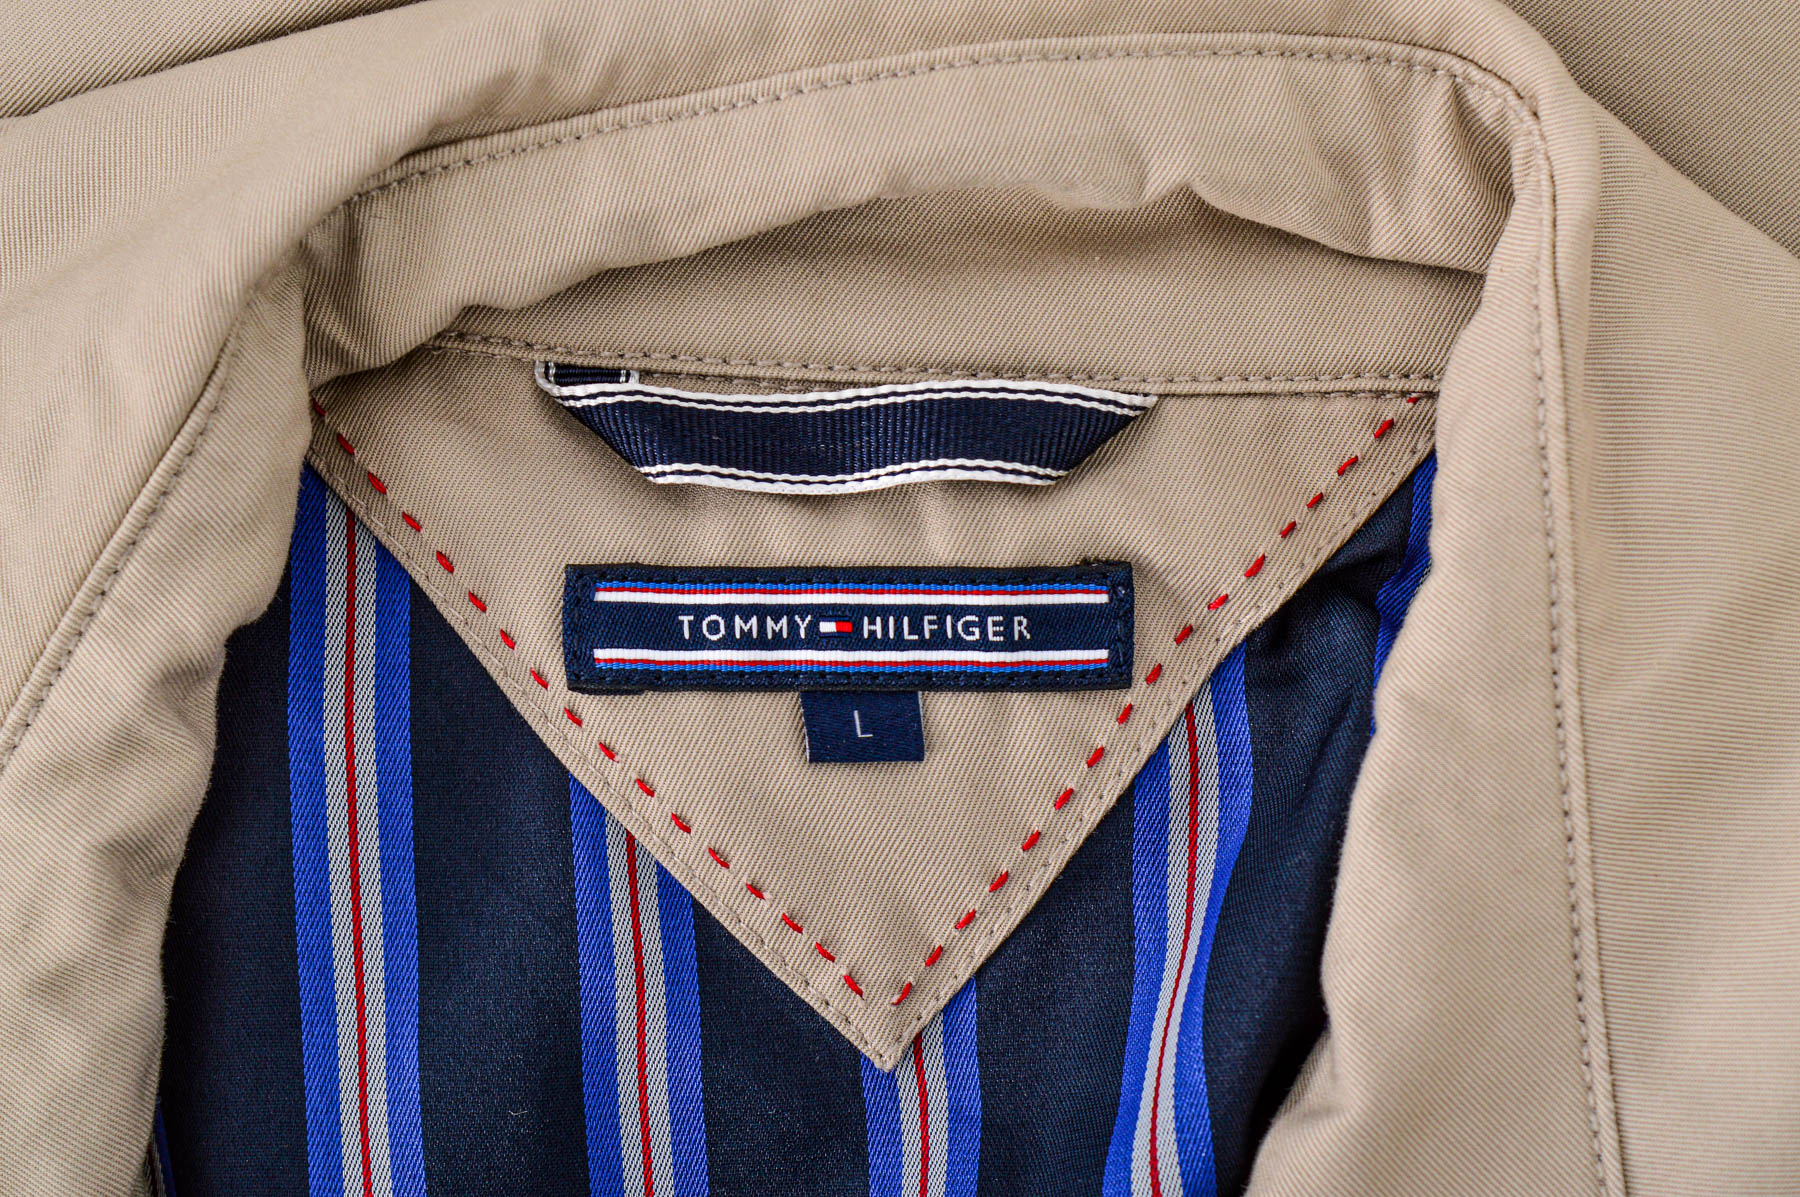 Ladies' Trench Coat - TOMMY HILFIGER - 2